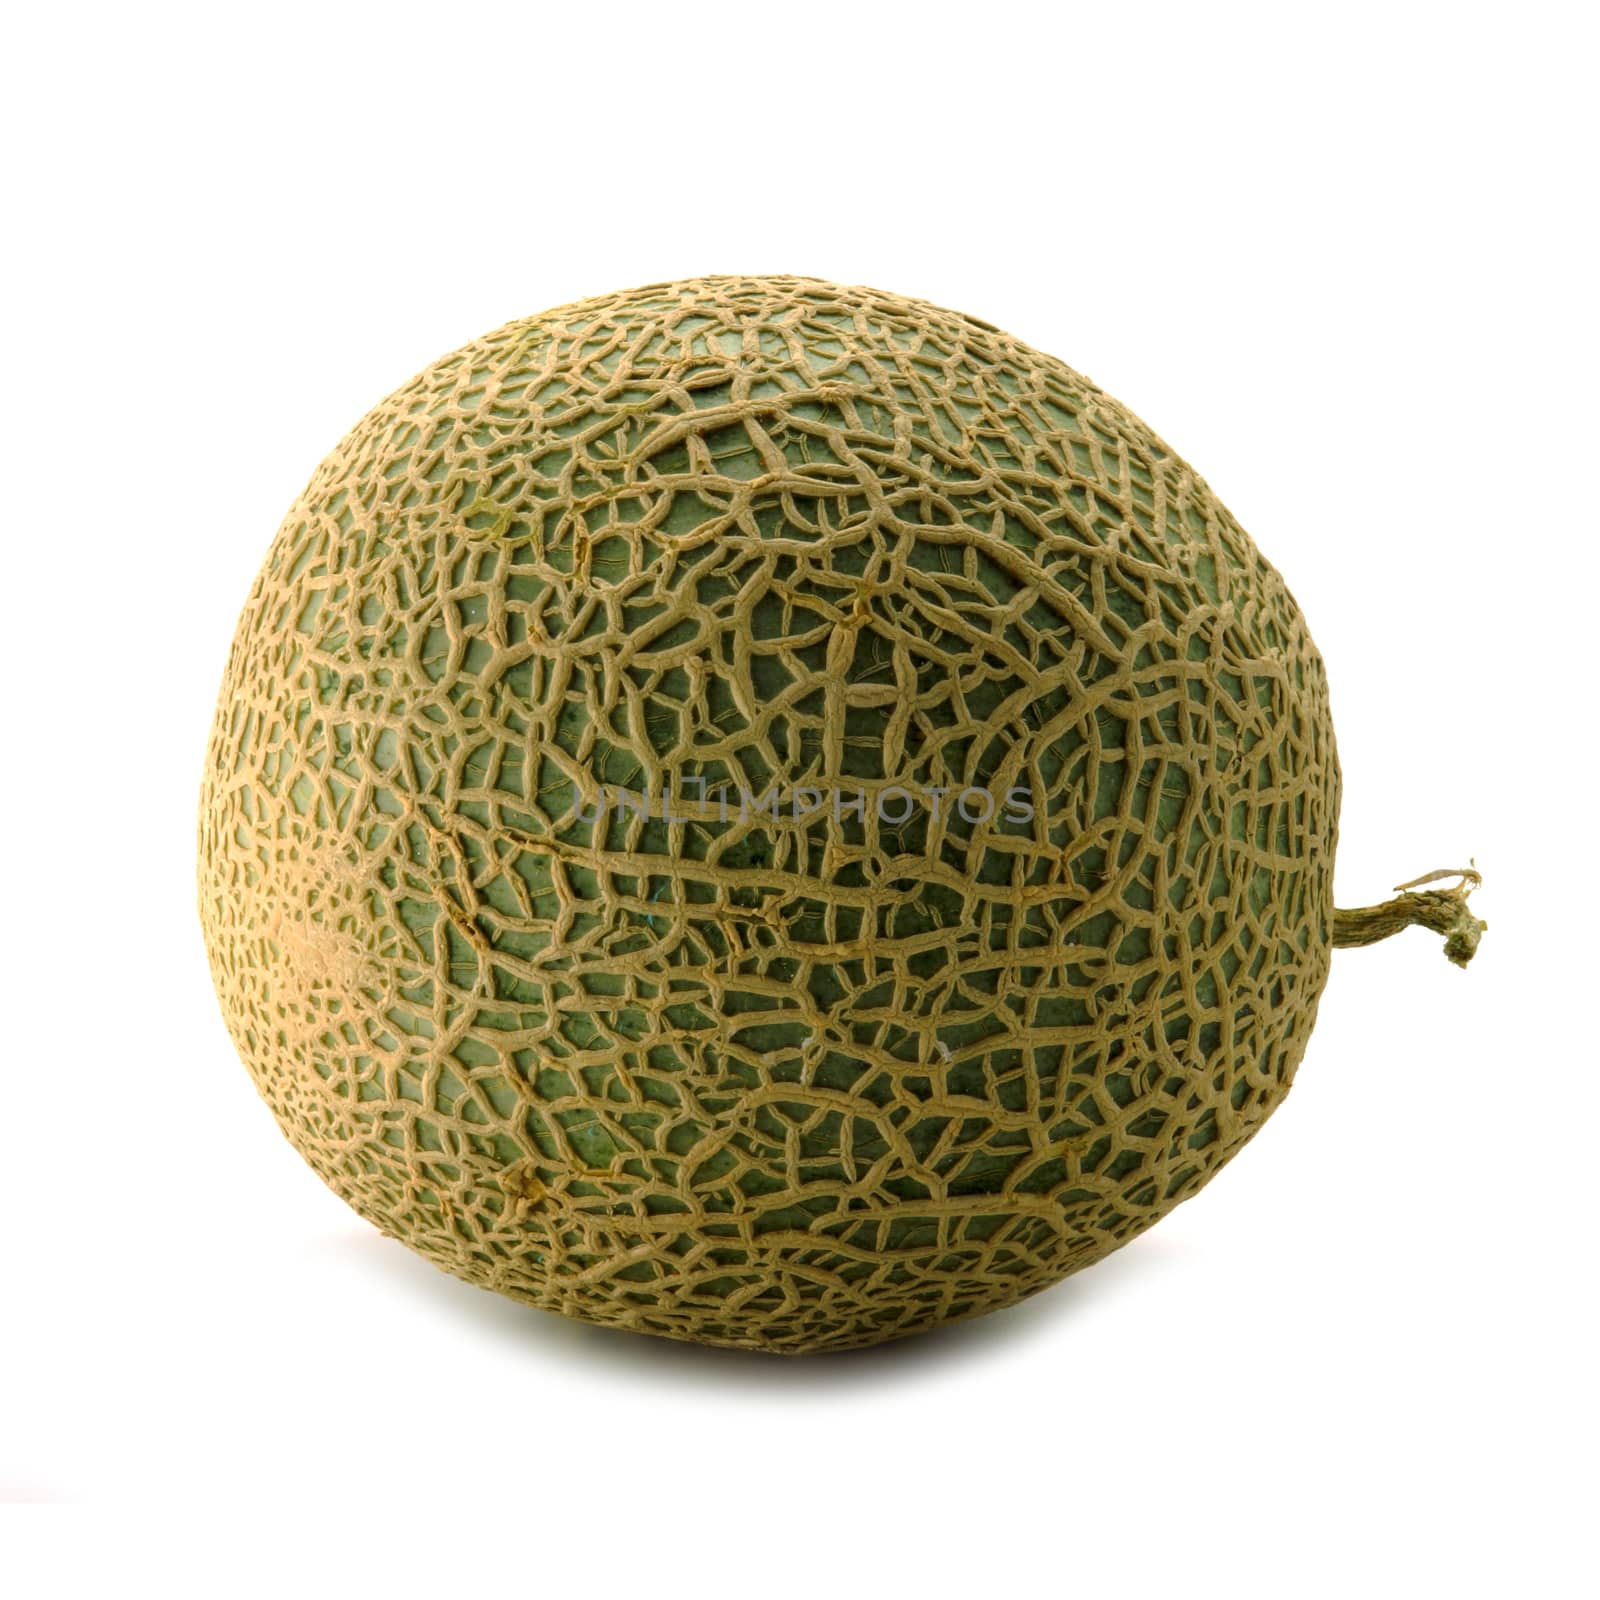 Netted melon on white background by Noppharat_th